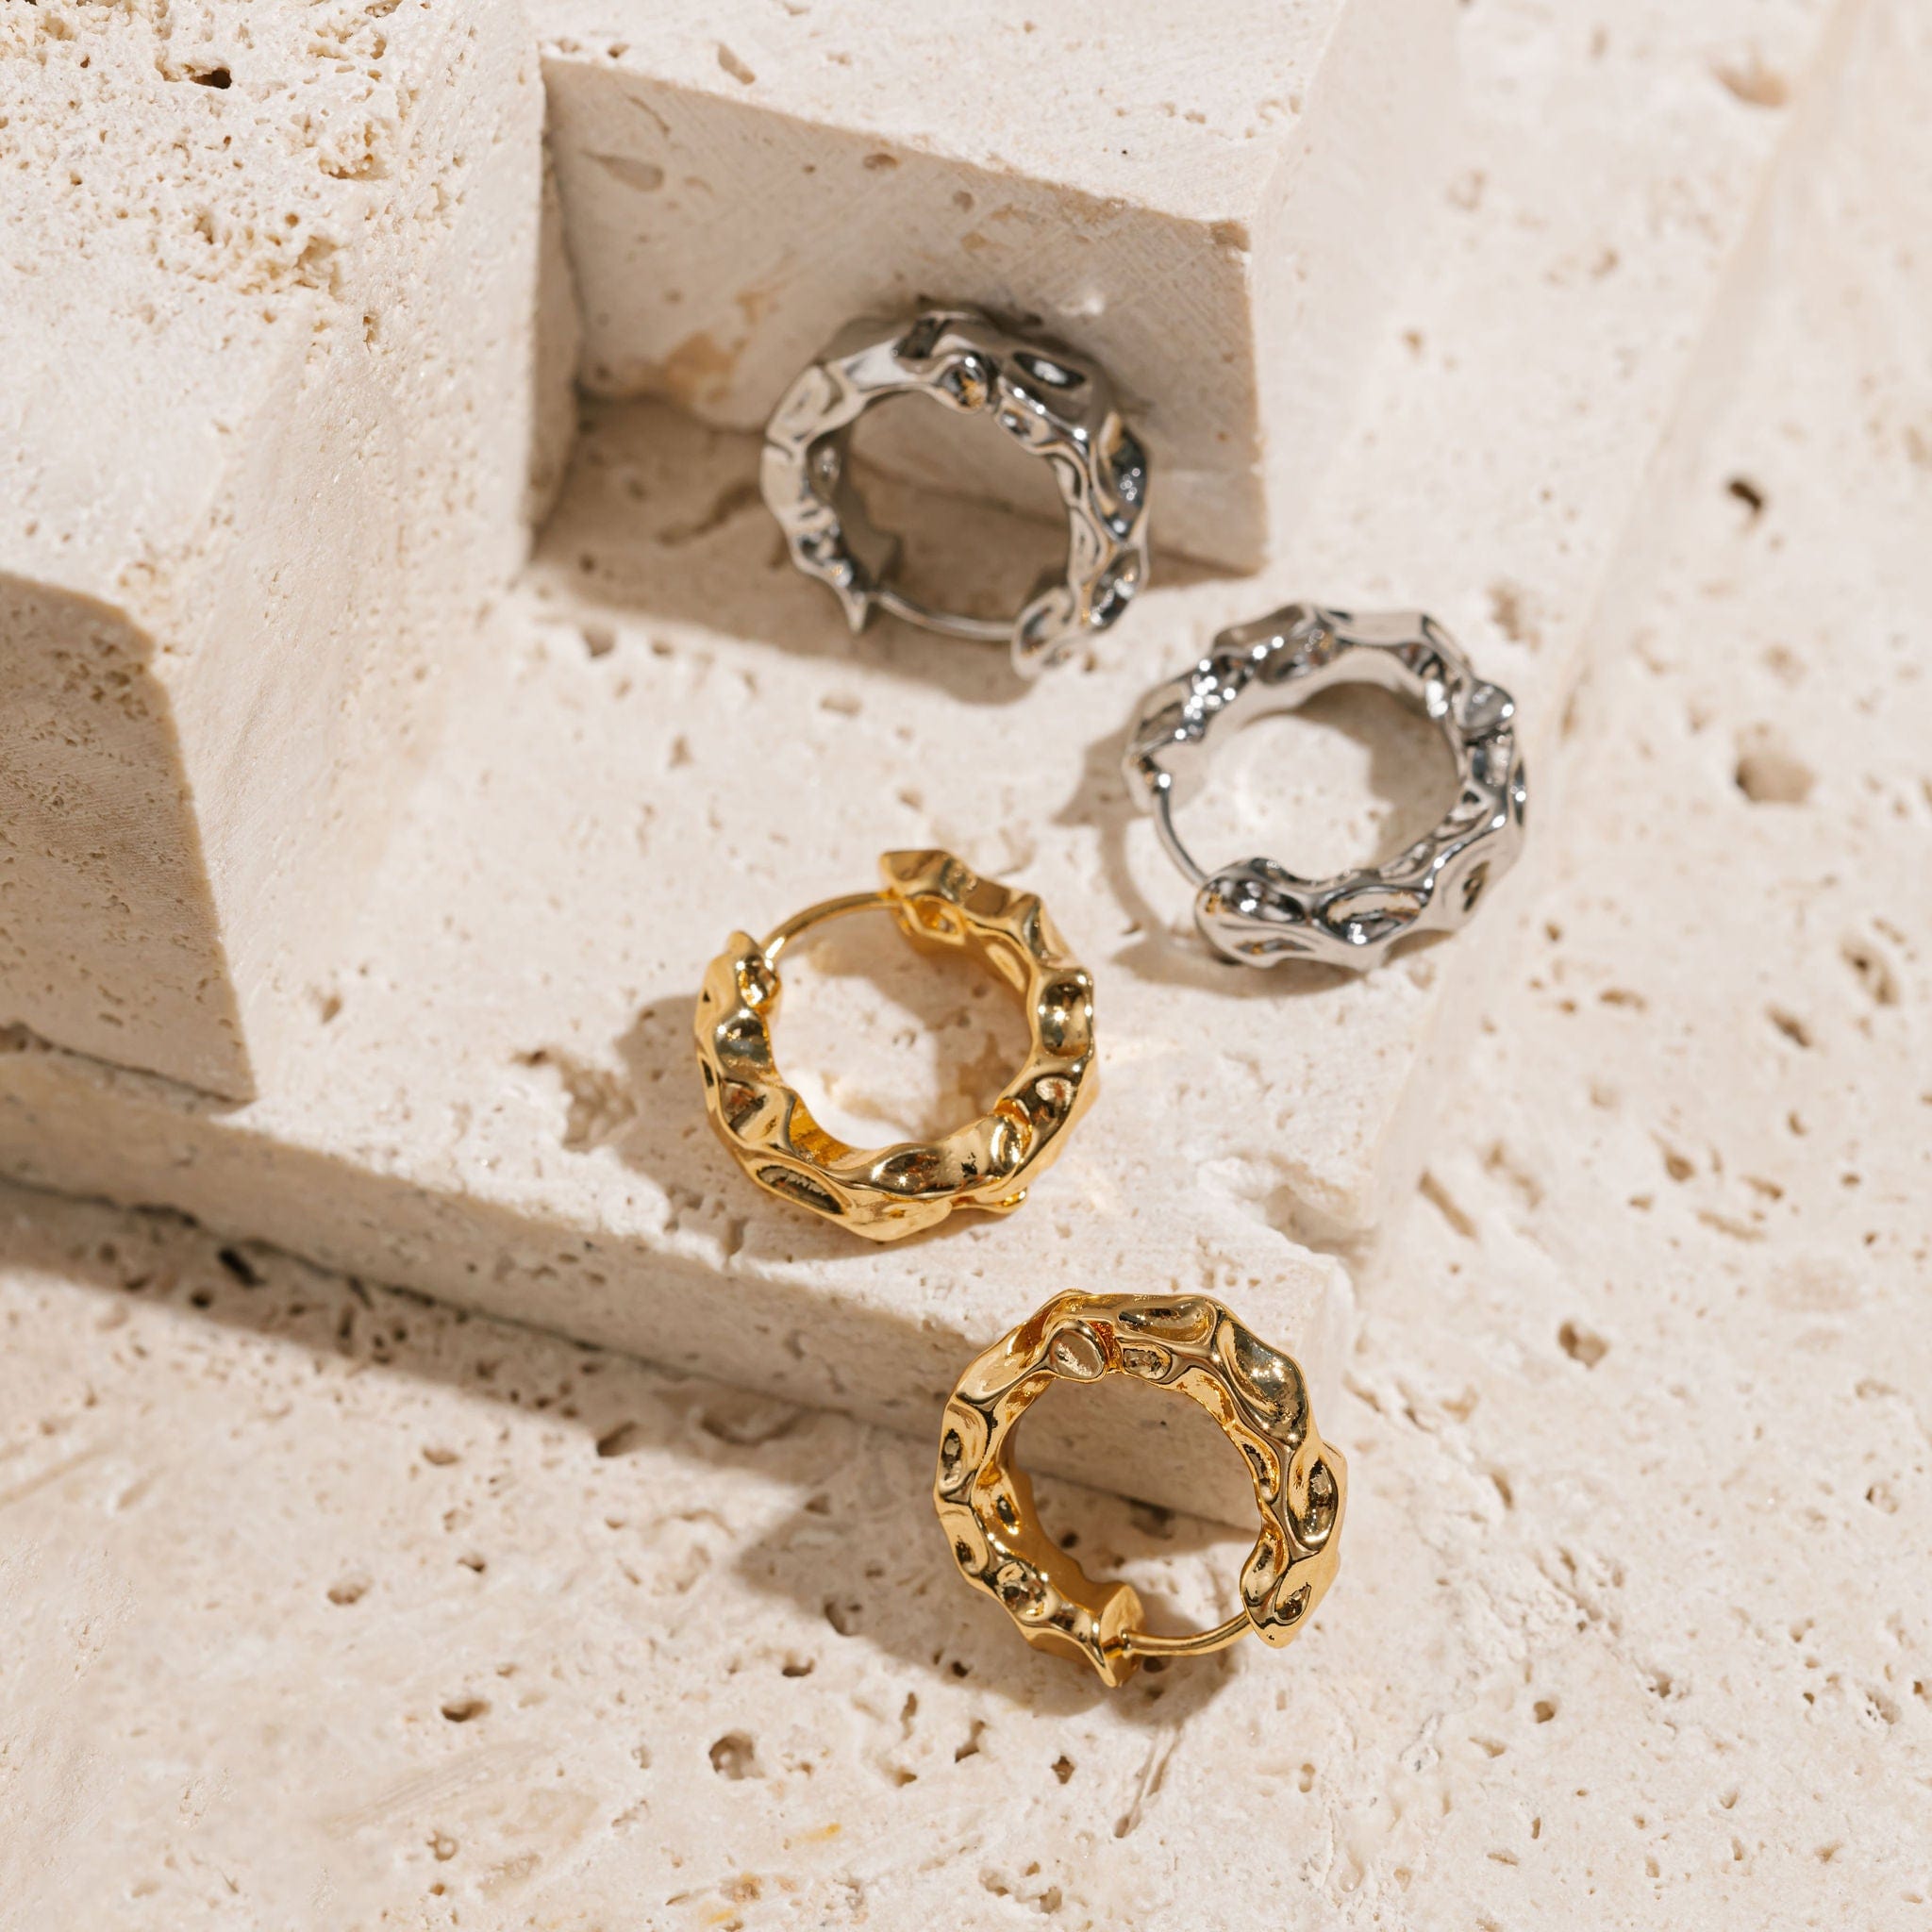  A pair of Marquis Hoop Mini earrings lies on an elevated counter while a pair of Marquis Hoop Mini Platinum earrings sits on the counter below, the hammered texture of each being accentuated in the light. 